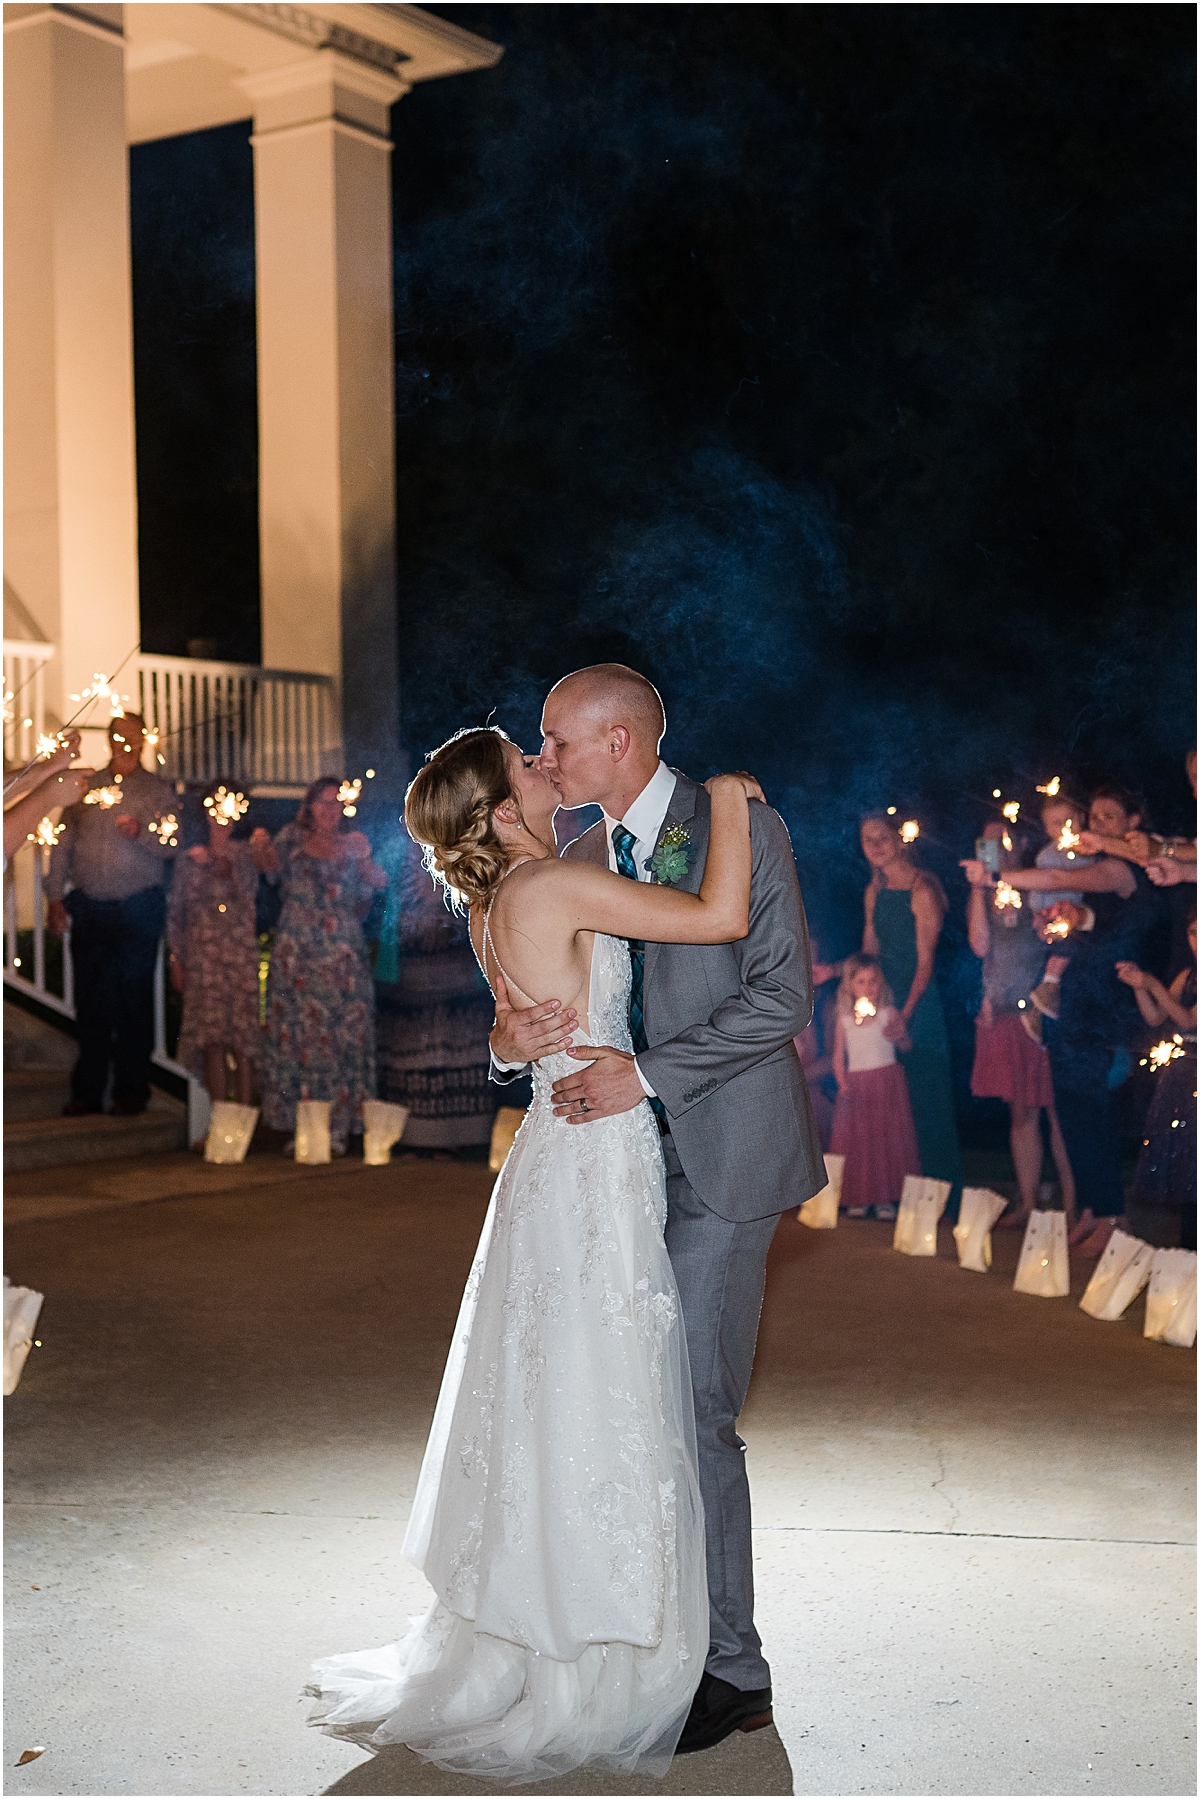 Luke and Brynn kissing during their sparkler exit